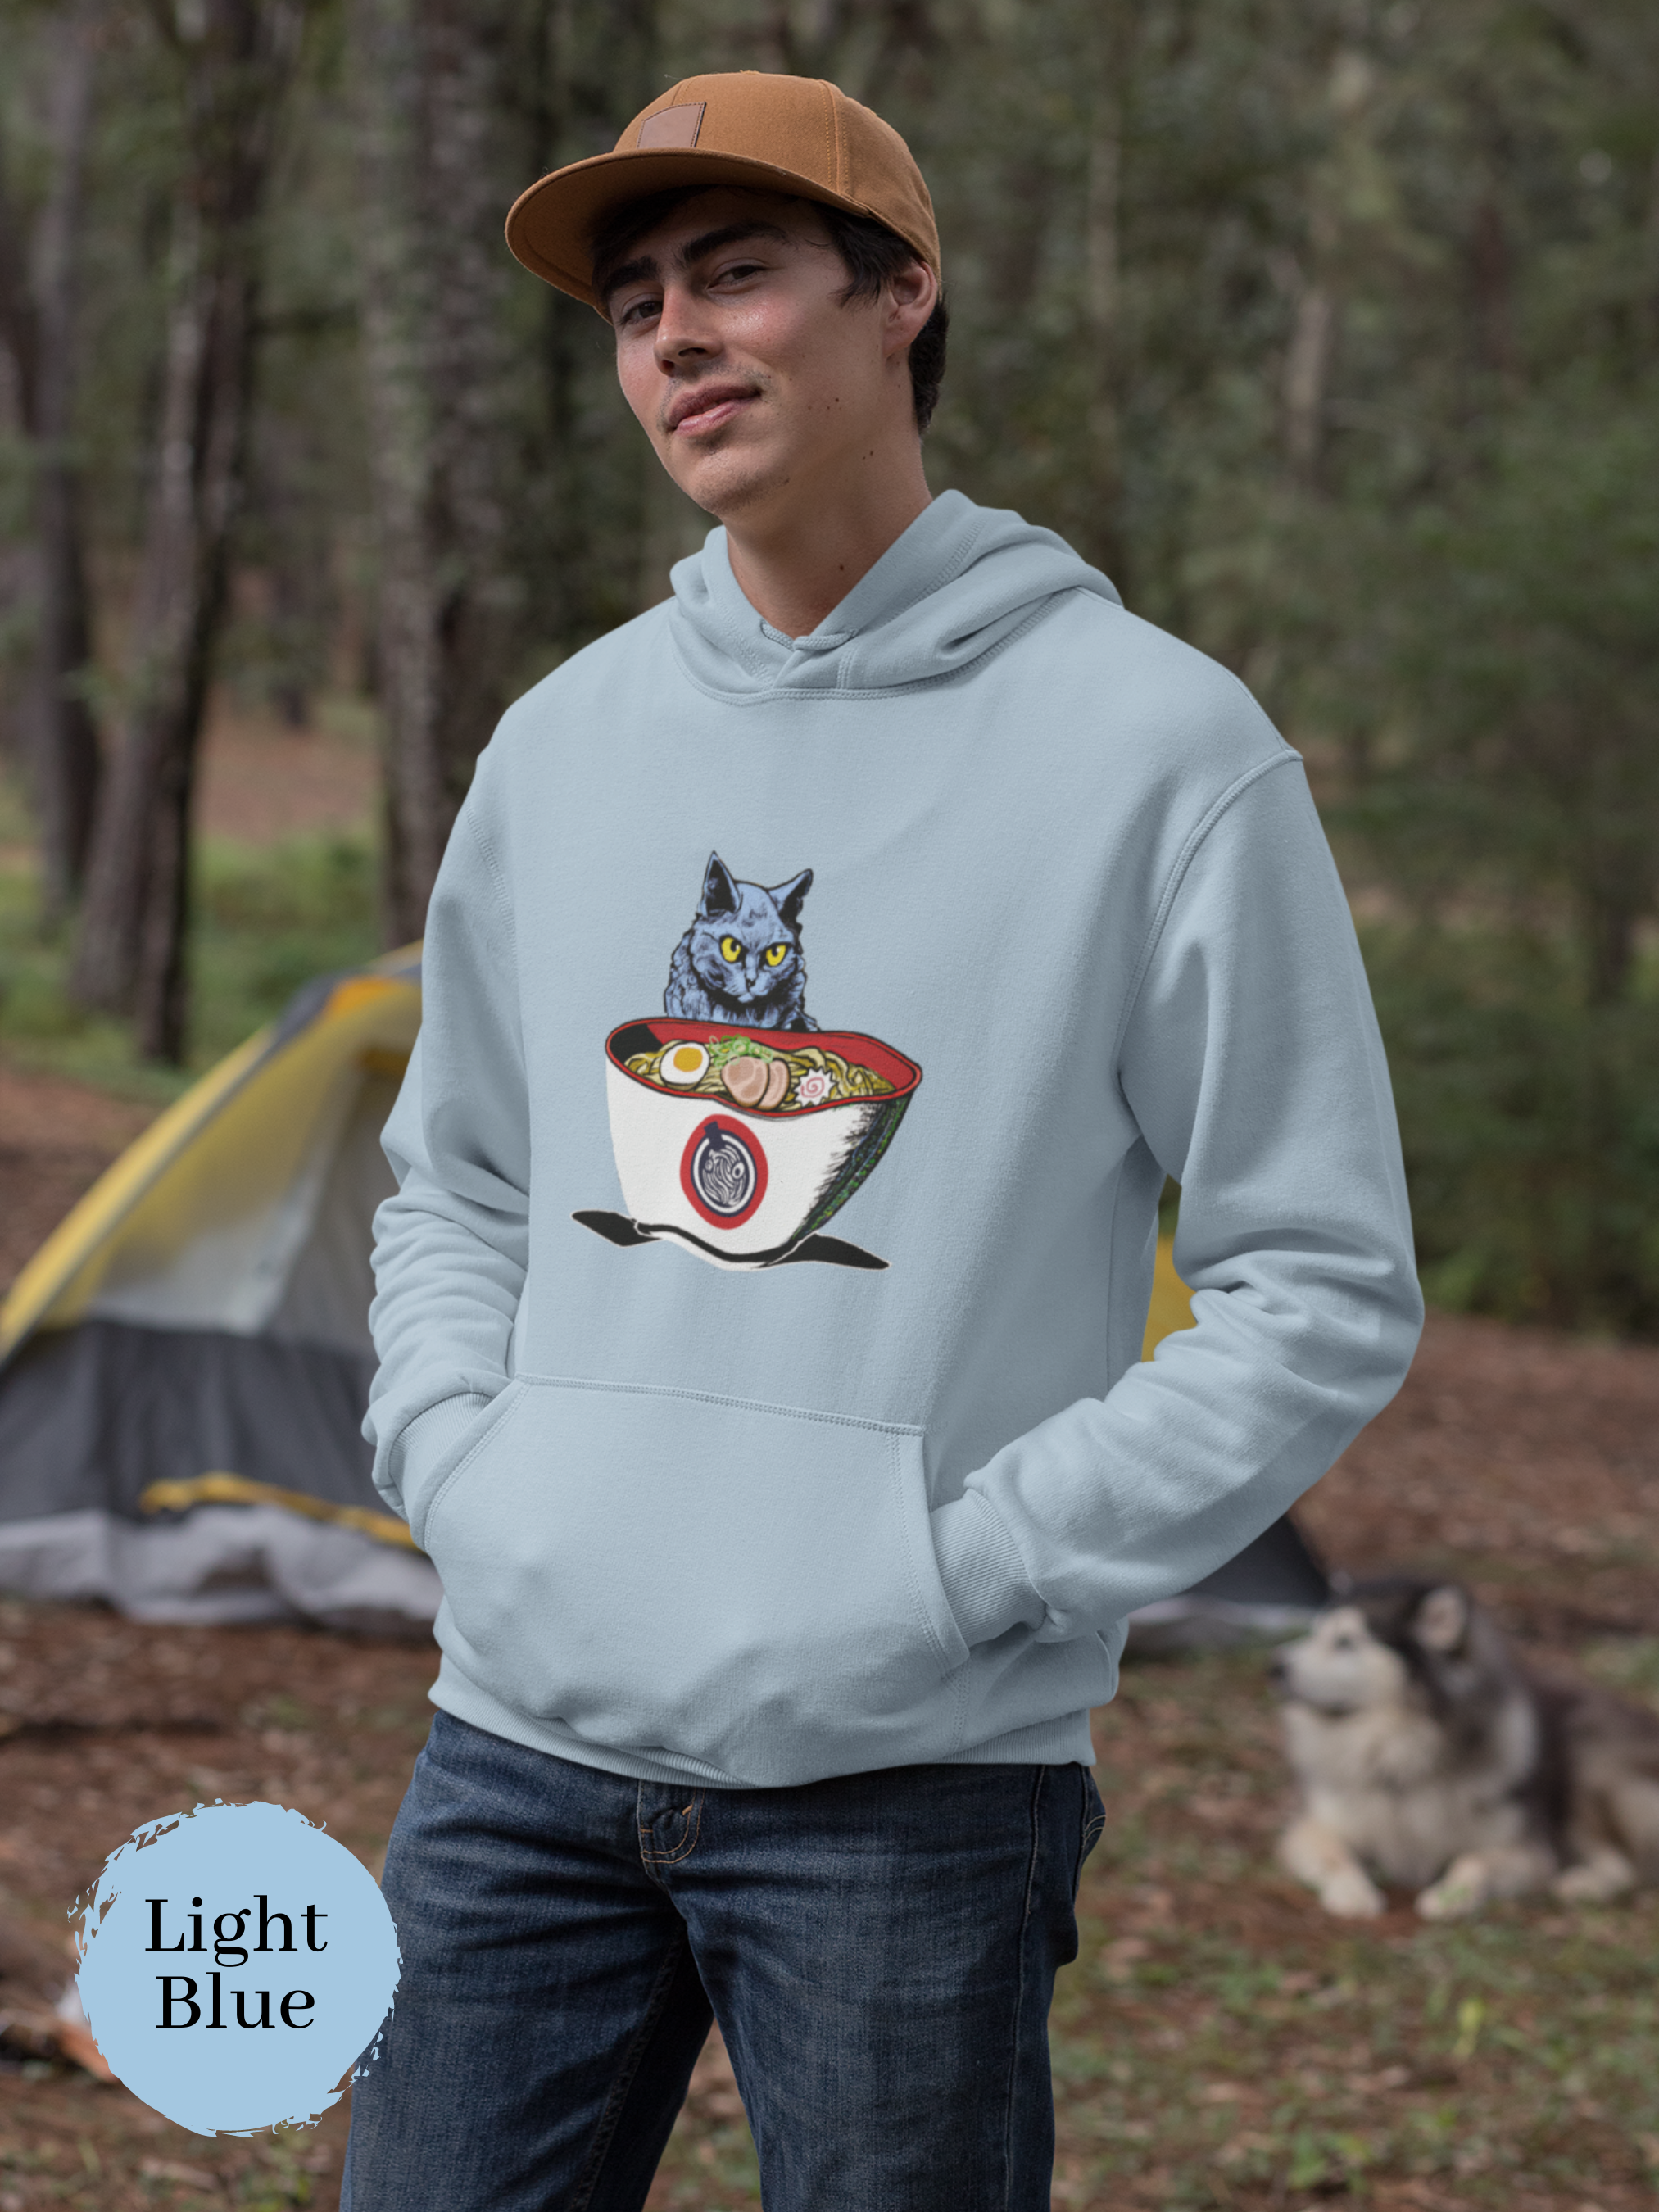 Ramen Hoodie: Angry Ramen Guardian - A Unique and Playful Asian Food Hoodie with a Pun Twist